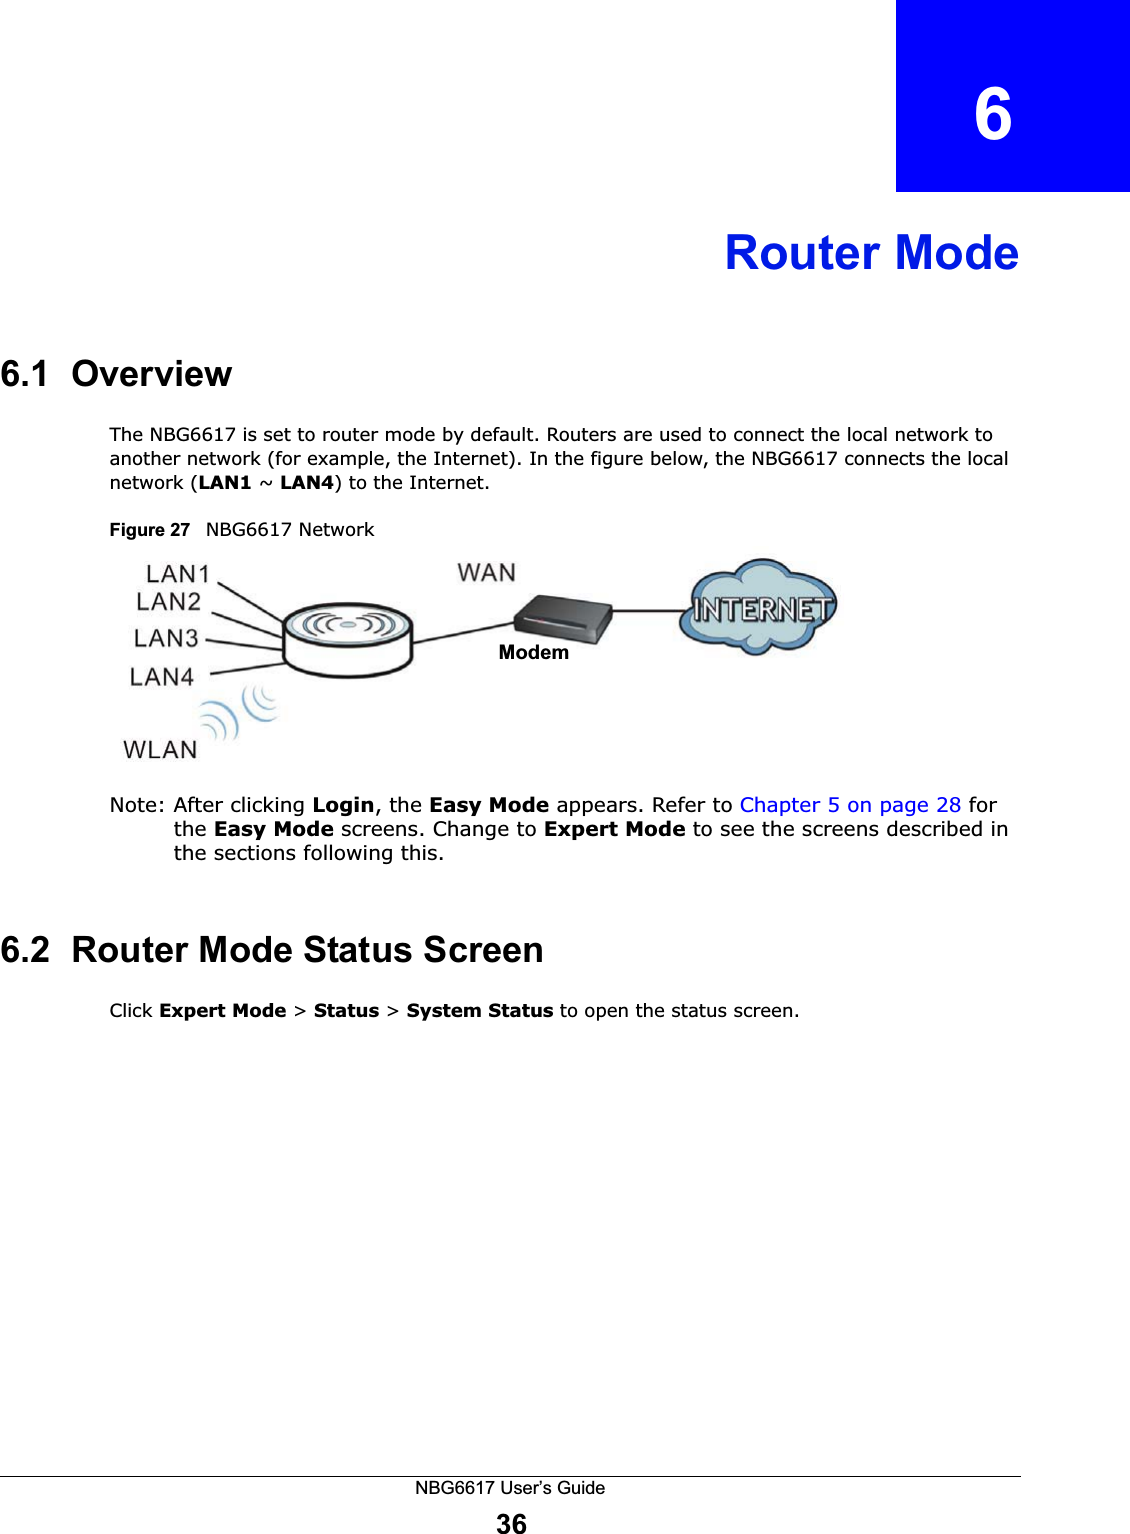 NBG6617 User’s Guide36CHAPTER   6Router Mode6.1  OverviewThe NBG6617 is set to router mode by default. Routers are used to connect the local network to another network (for example, the Internet). In the figure below, the NBG6617 connects the local network (LAN1 ~ LAN4) to the Internet.Figure 27   NBG6617 NetworkNote: After clicking Login, the Easy Mode appears. Refer to Chapter 5 on page 28 for the Easy Mode screens. Change to Expert Mode to see the screens described in the sections following this.6.2  Router Mode Status ScreenClick Expert Mode &gt; Status &gt; System Status to open the status screen. Modem